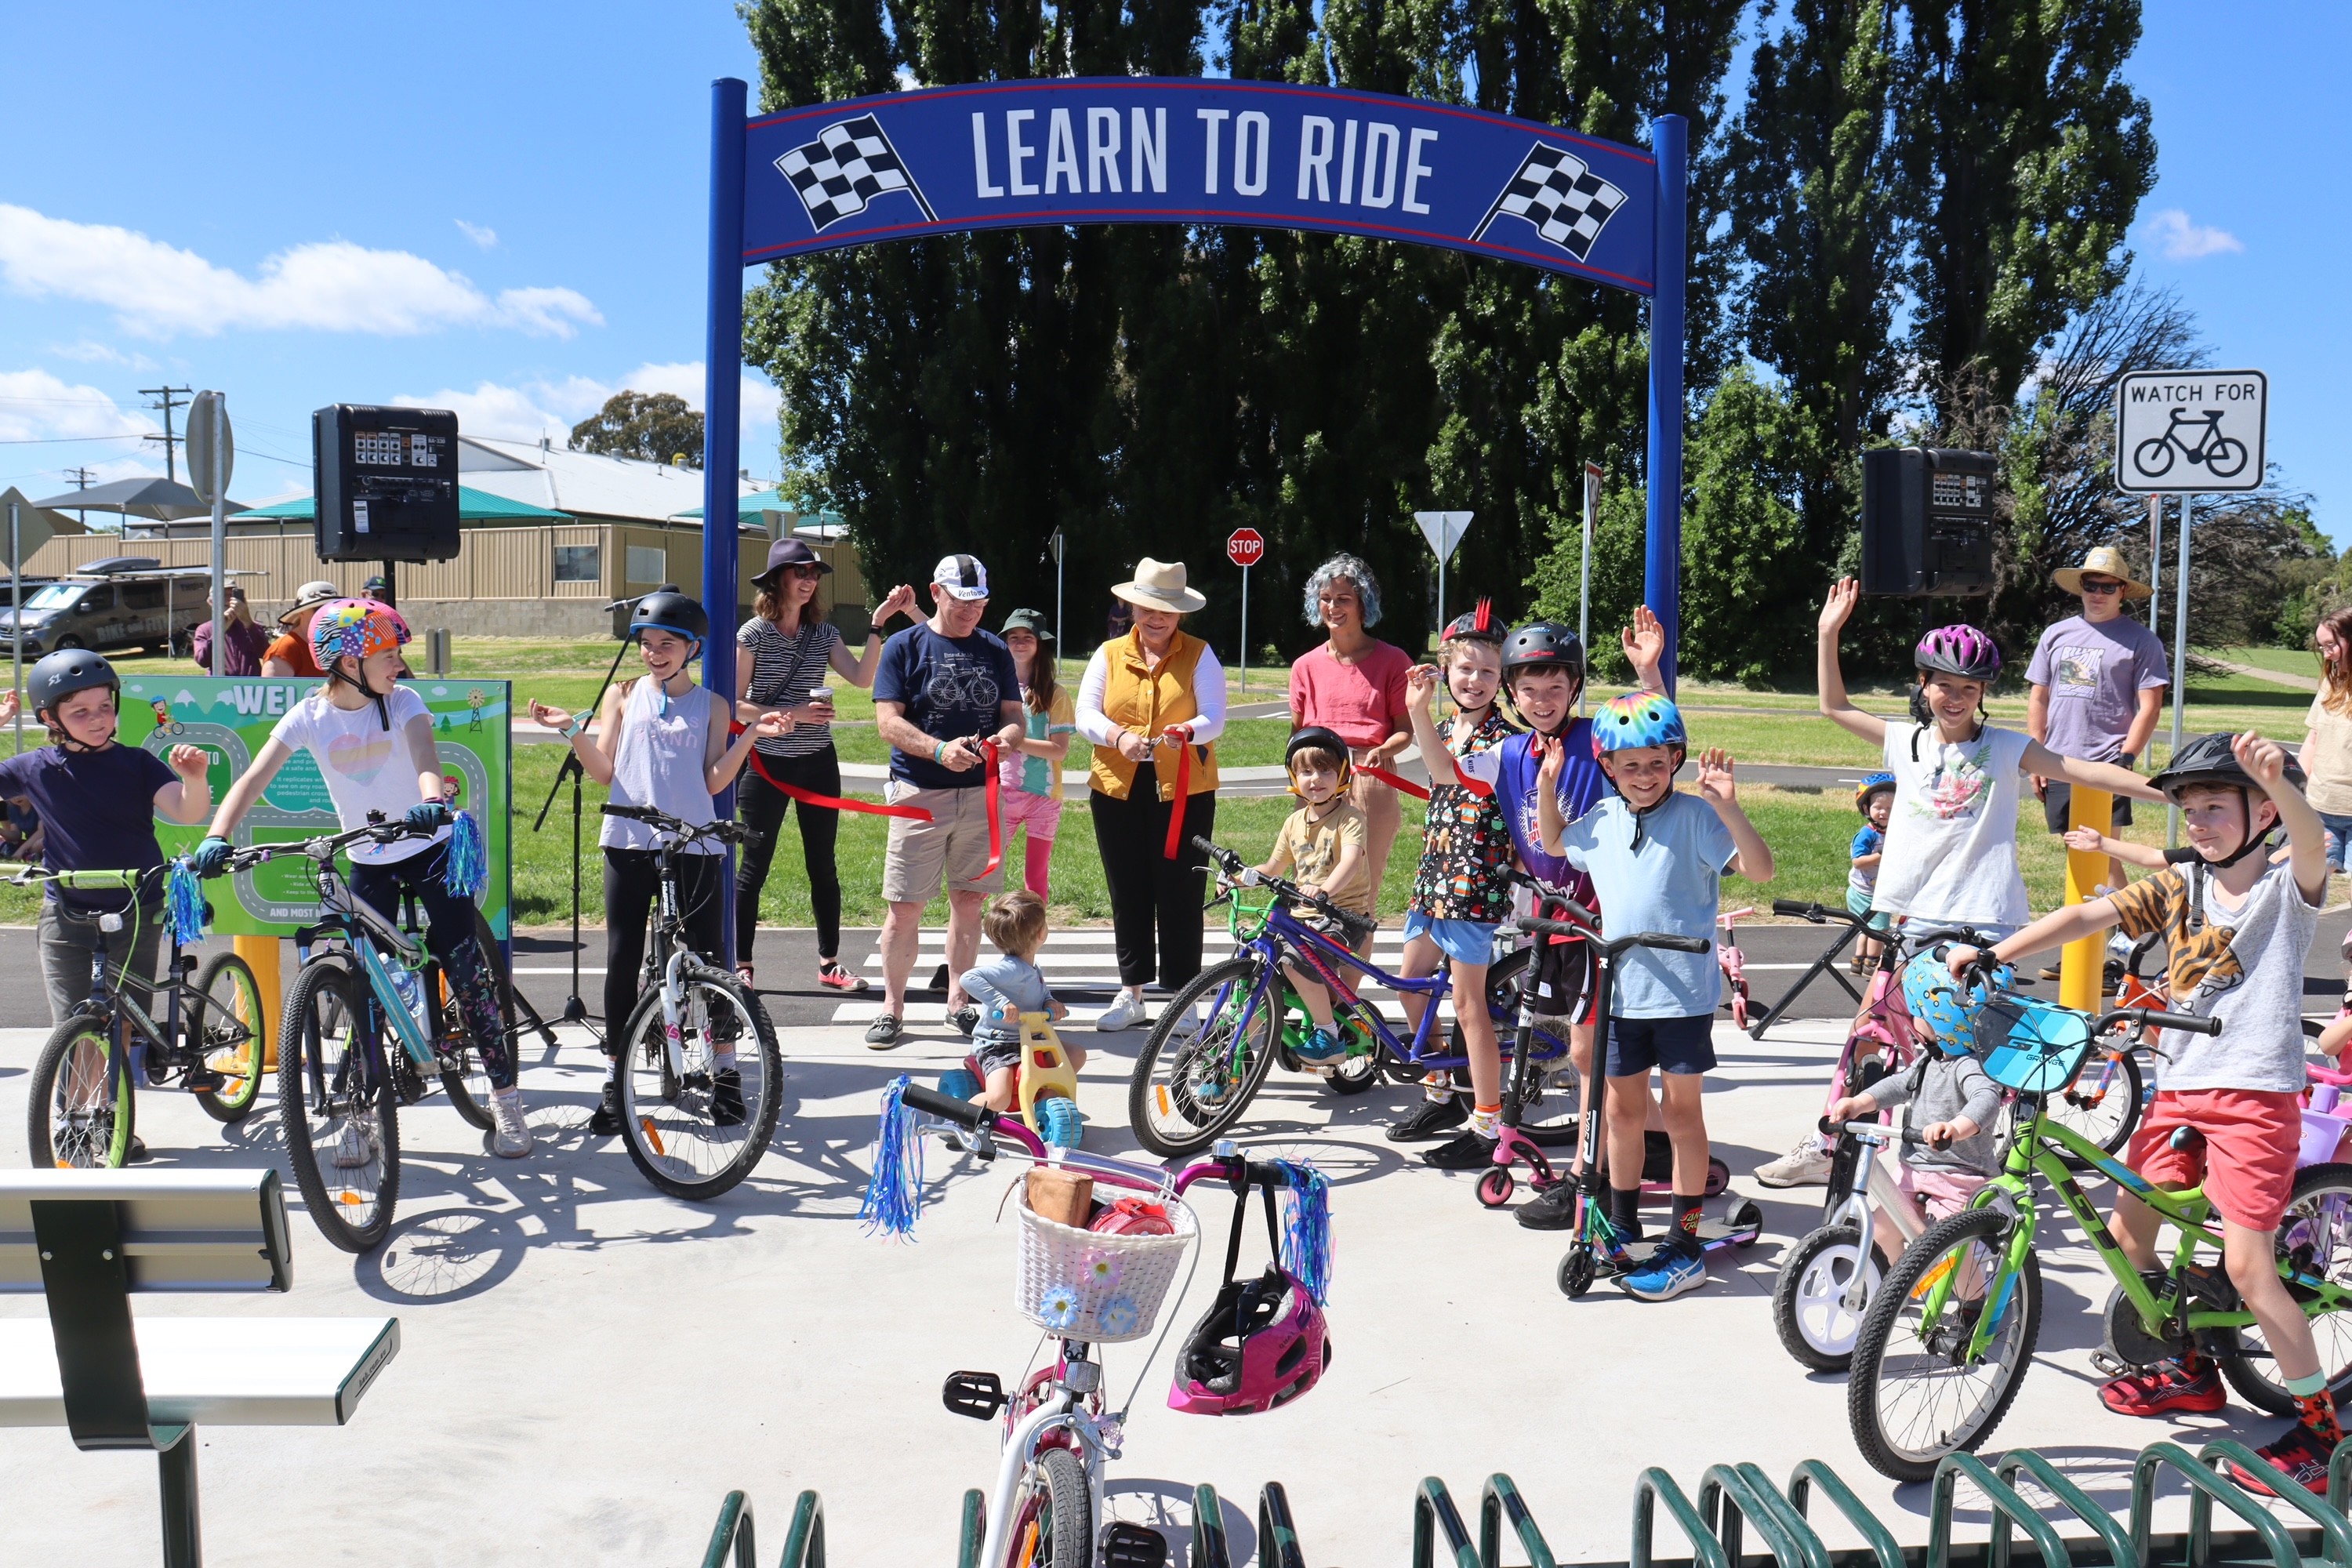 New Learn to Ride cycleway in Yass leads youngsters onto safe path